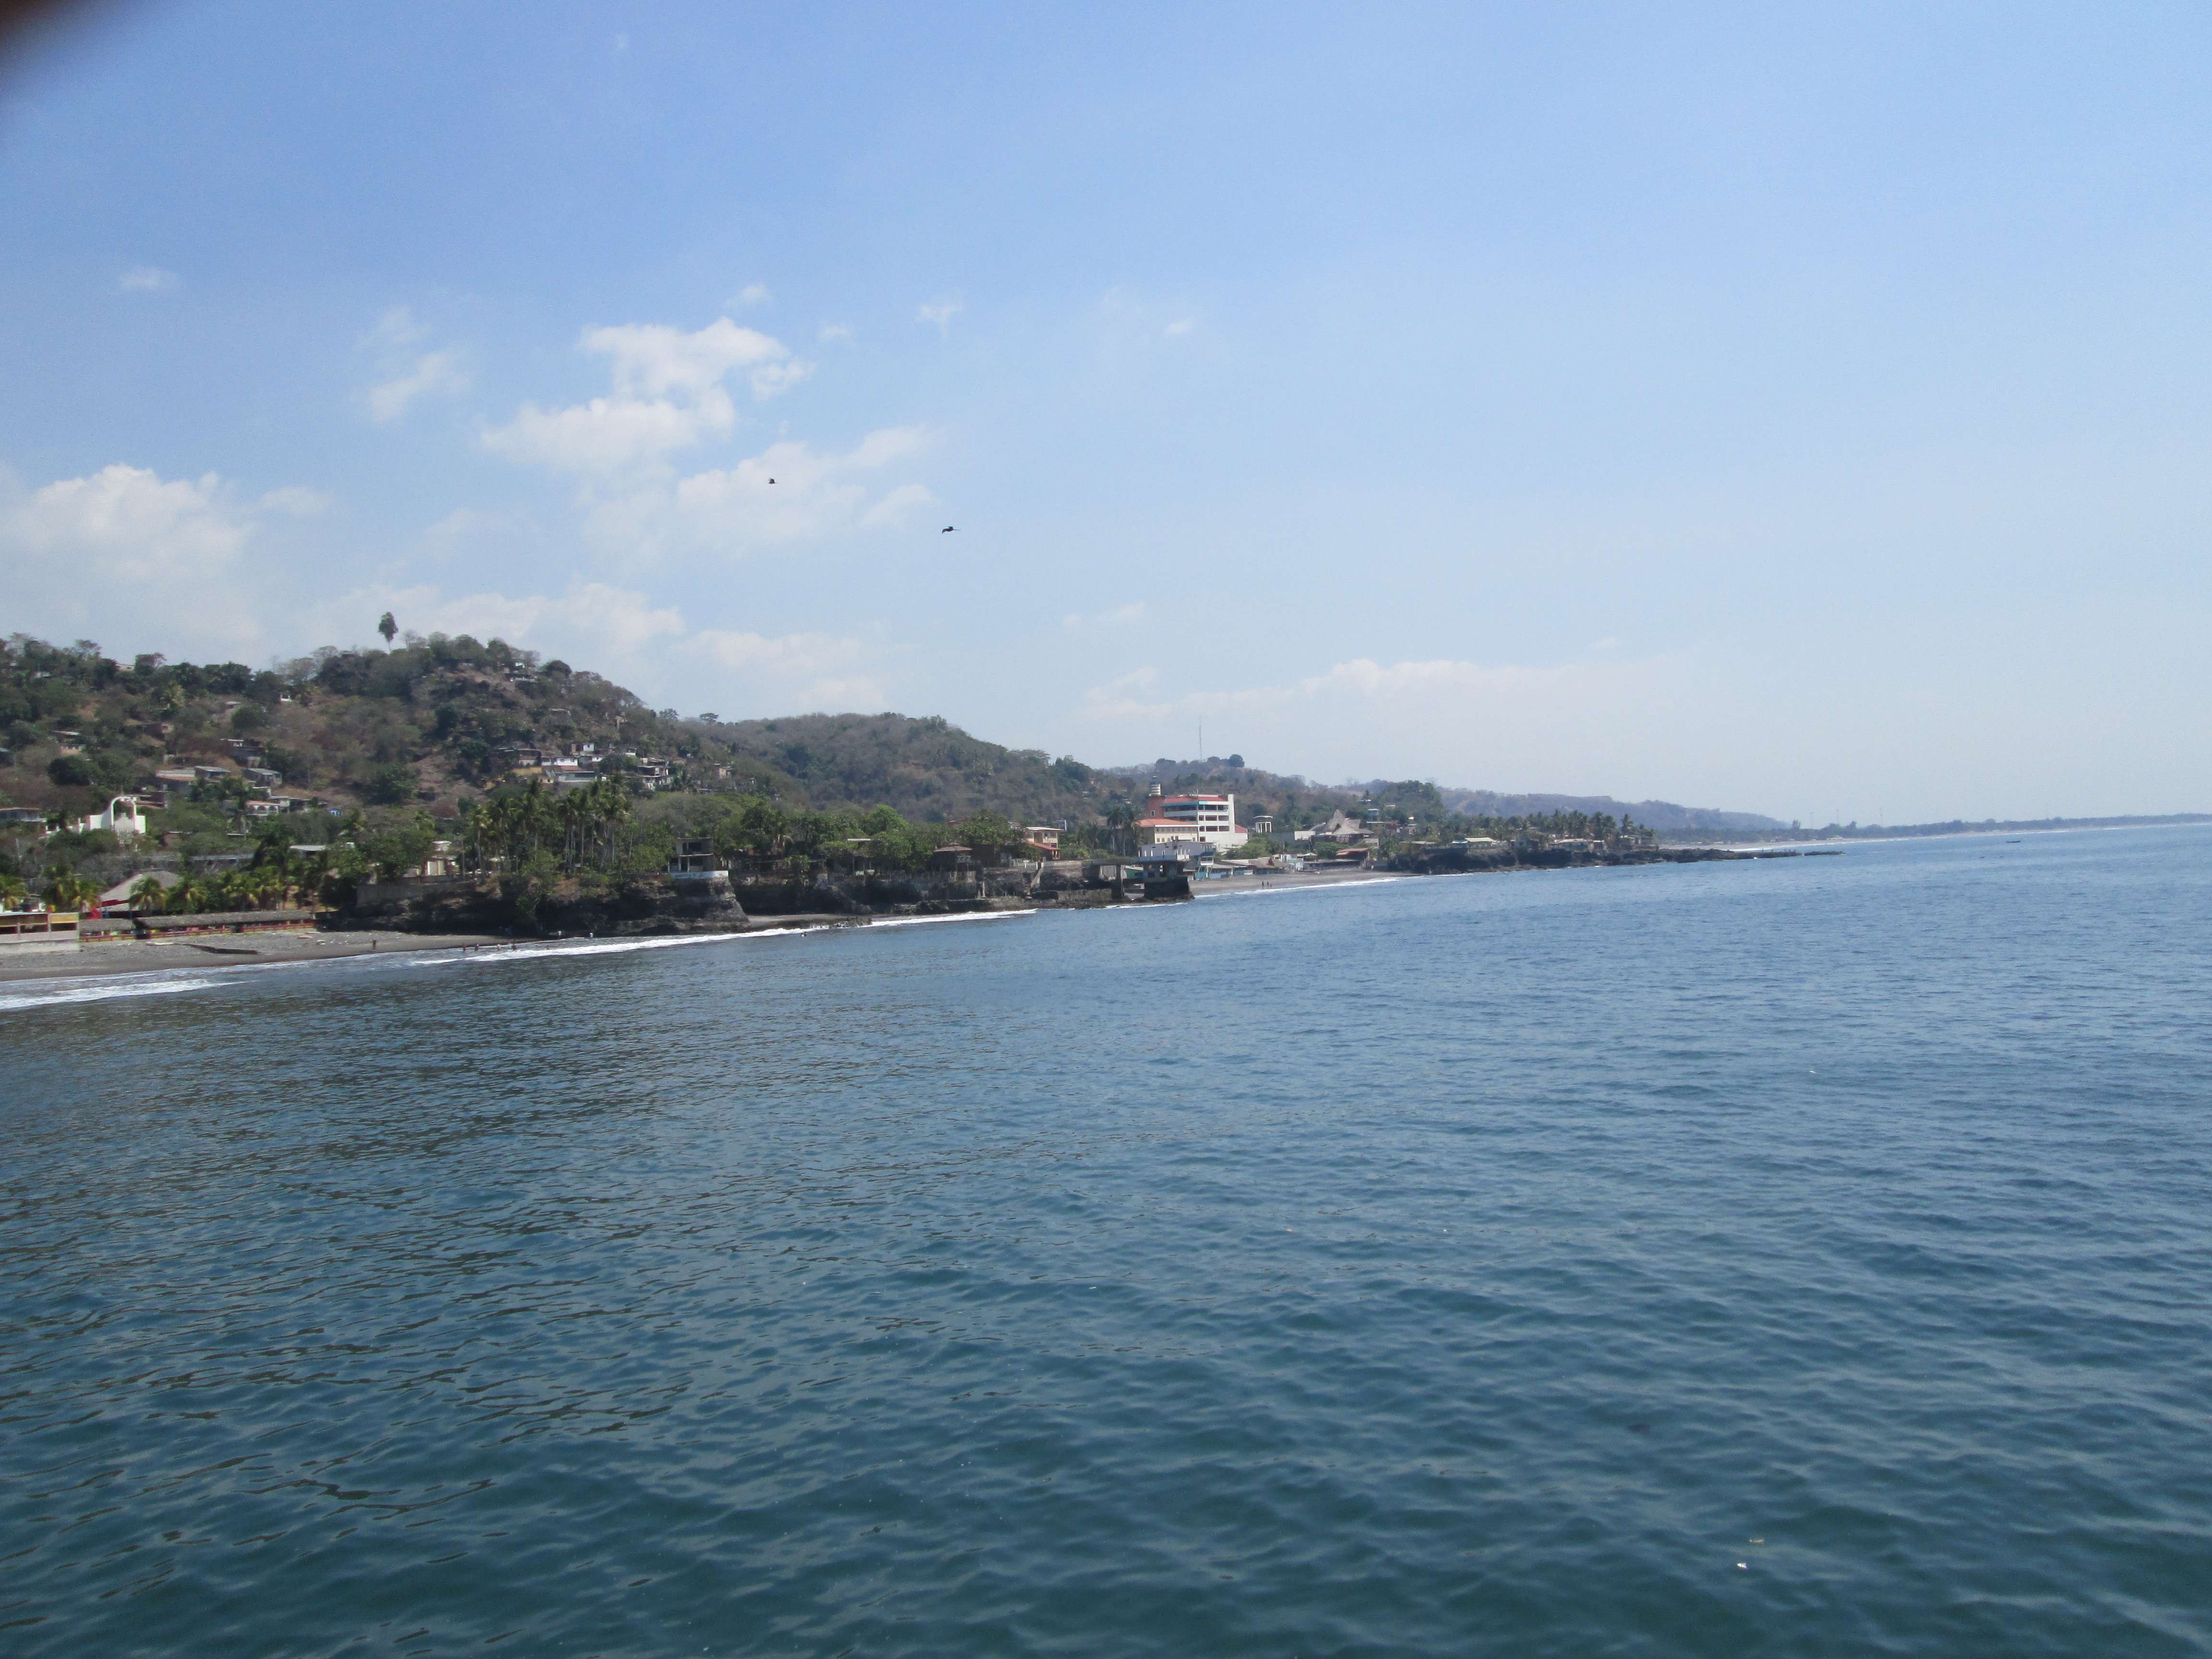 A view of the shore from the pier